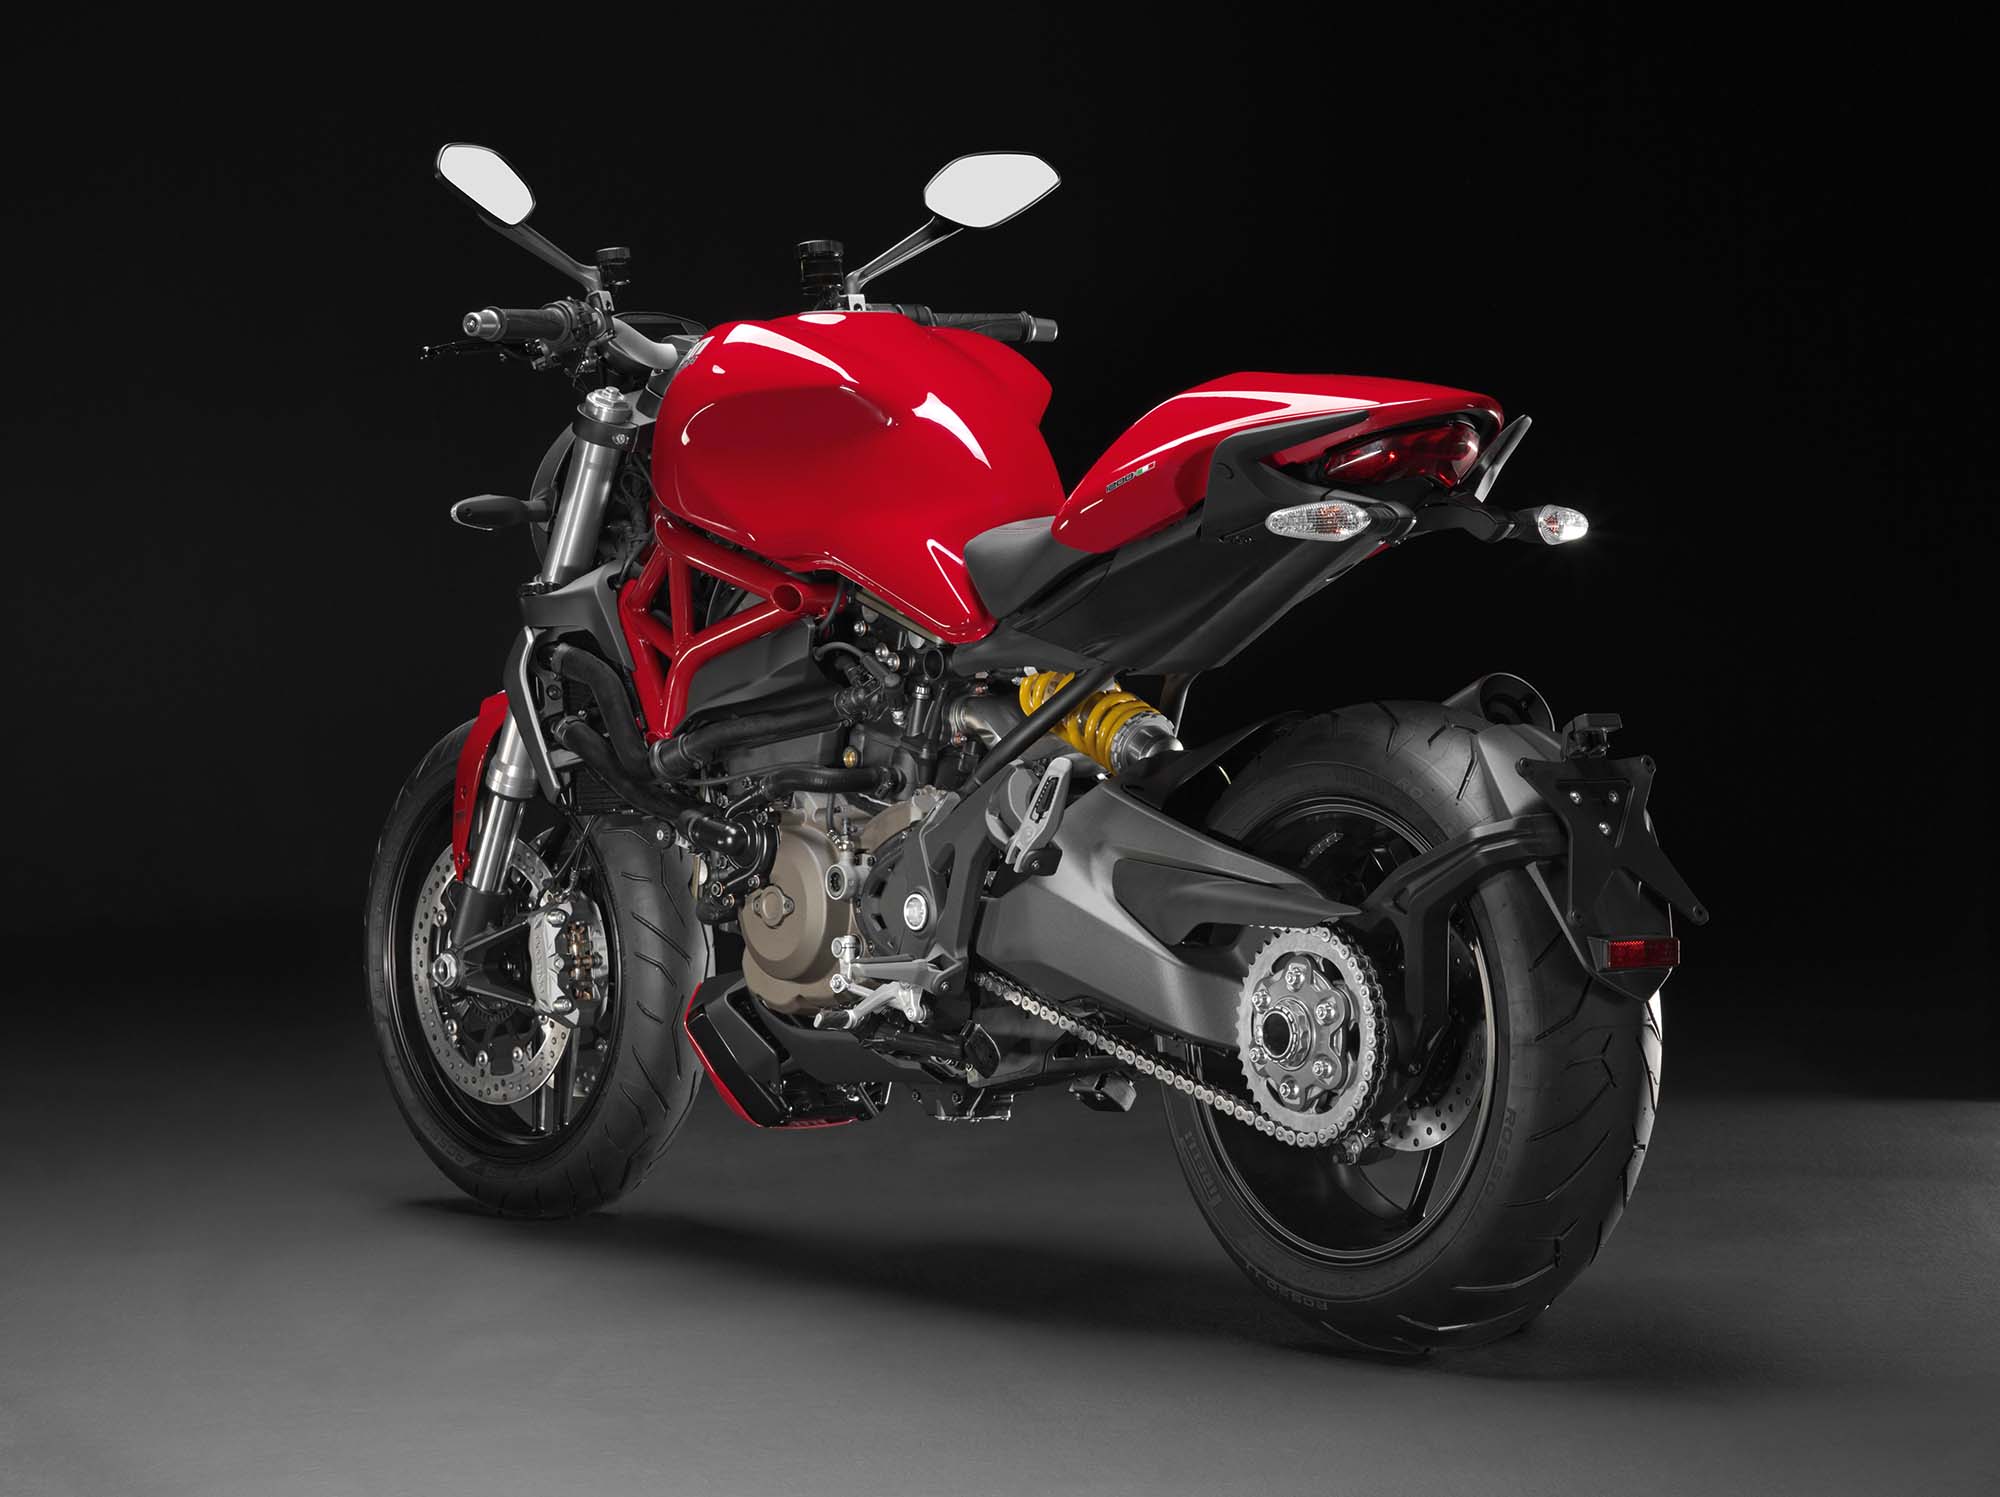 can be a bit distracting, the overall aesthetic of the 2014 Ducati 